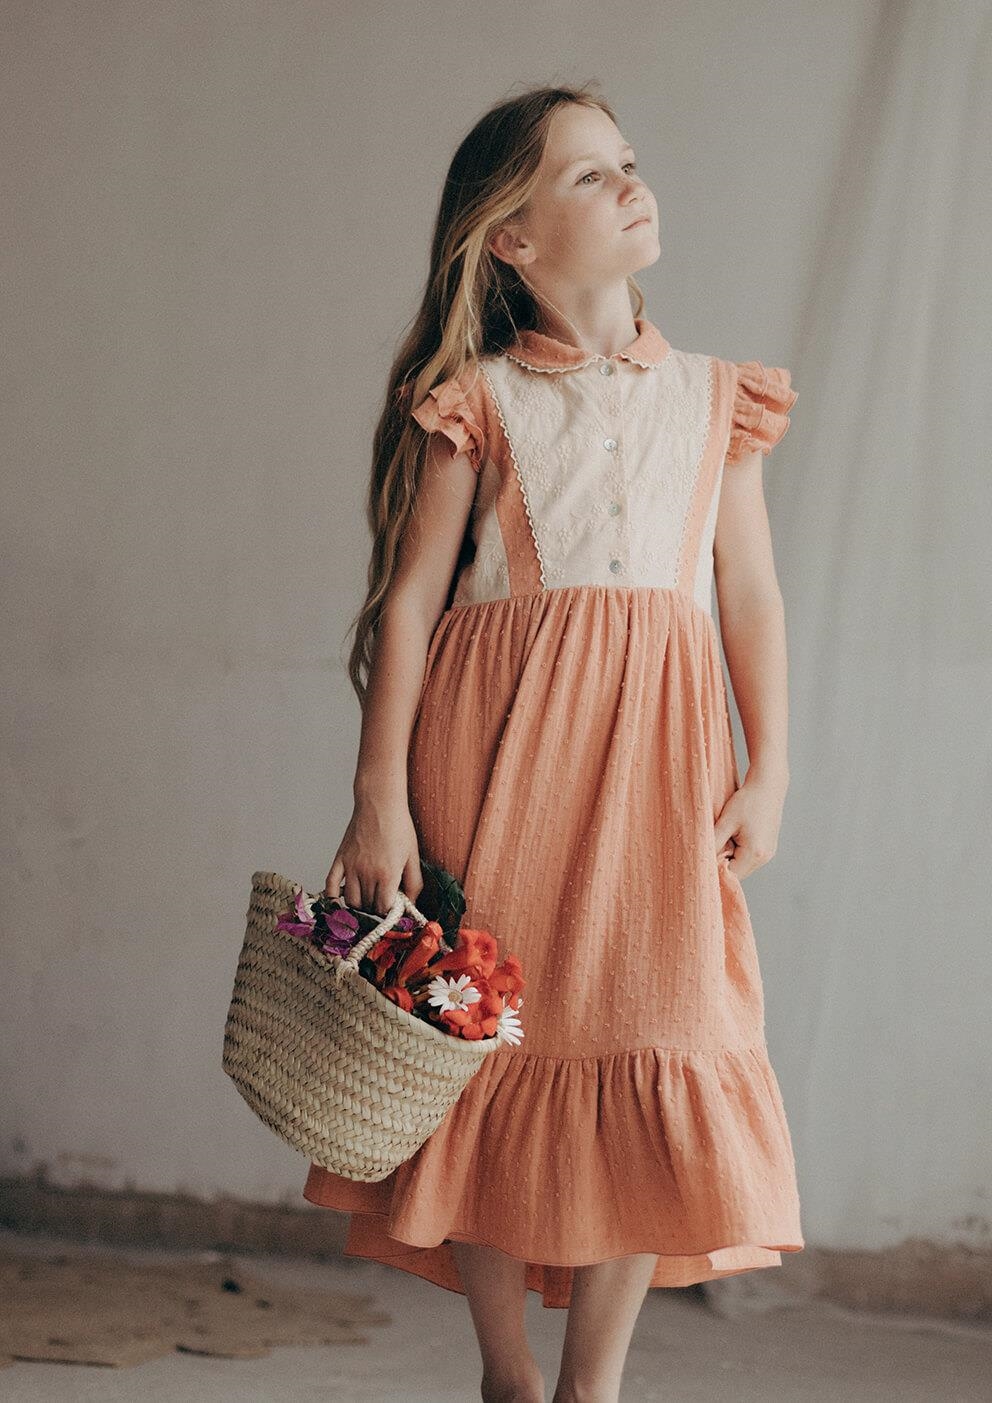 Mod.30.2 Organic coral dress with baby-style collar | SS23 Mod.30.2 Organic coral dress with baby-style collar